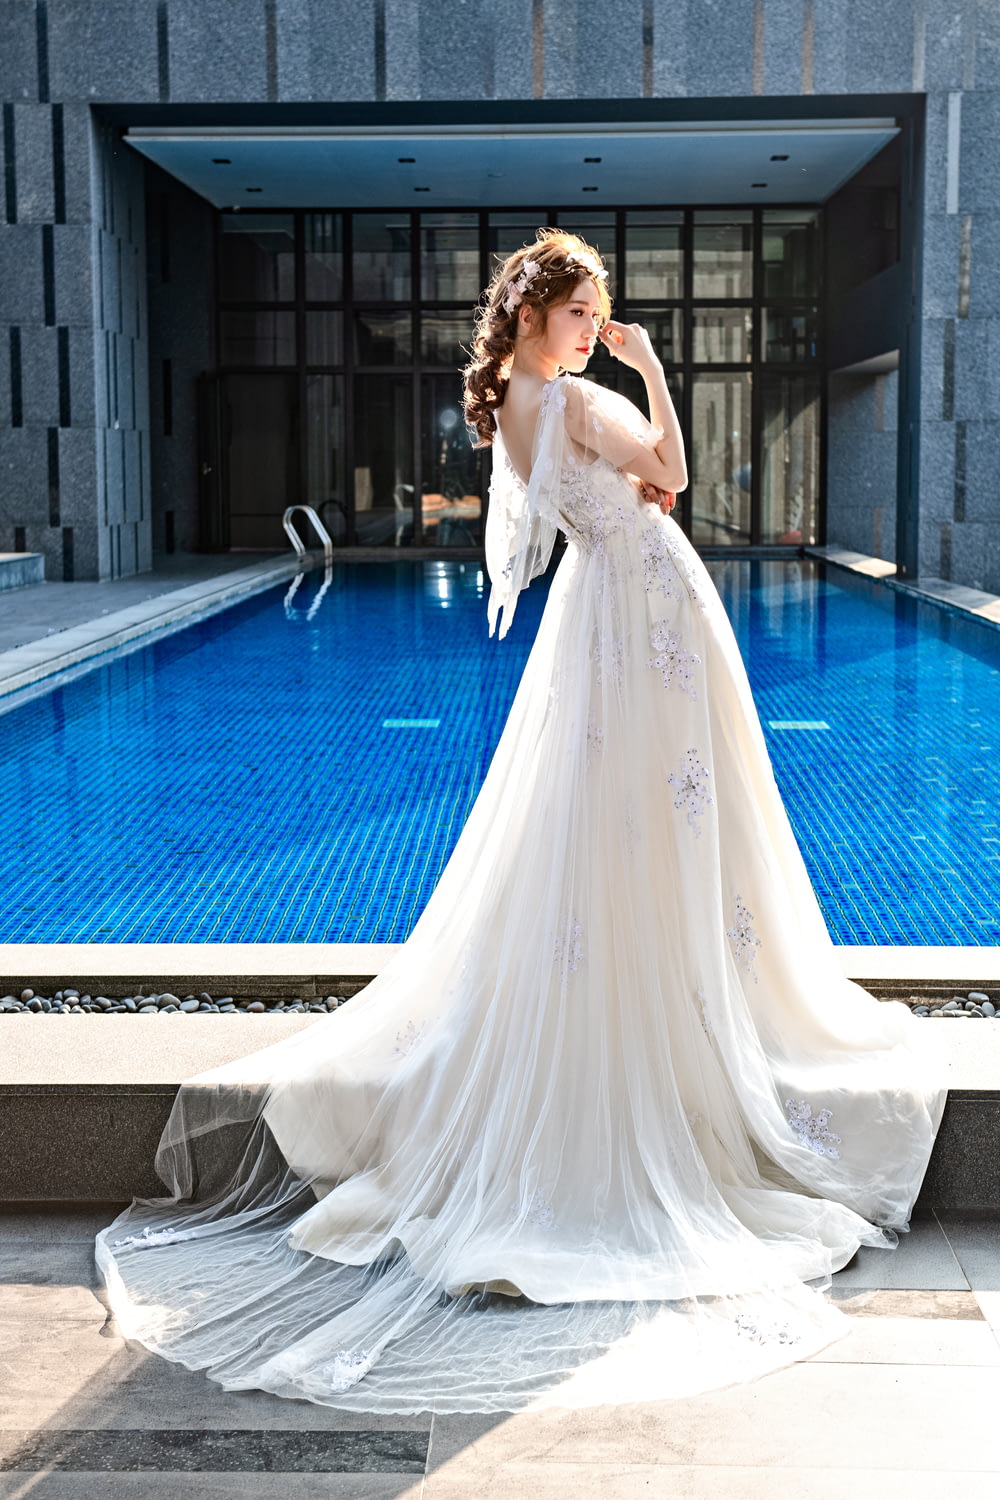 woman in white dress standing near swimming pool during daytime